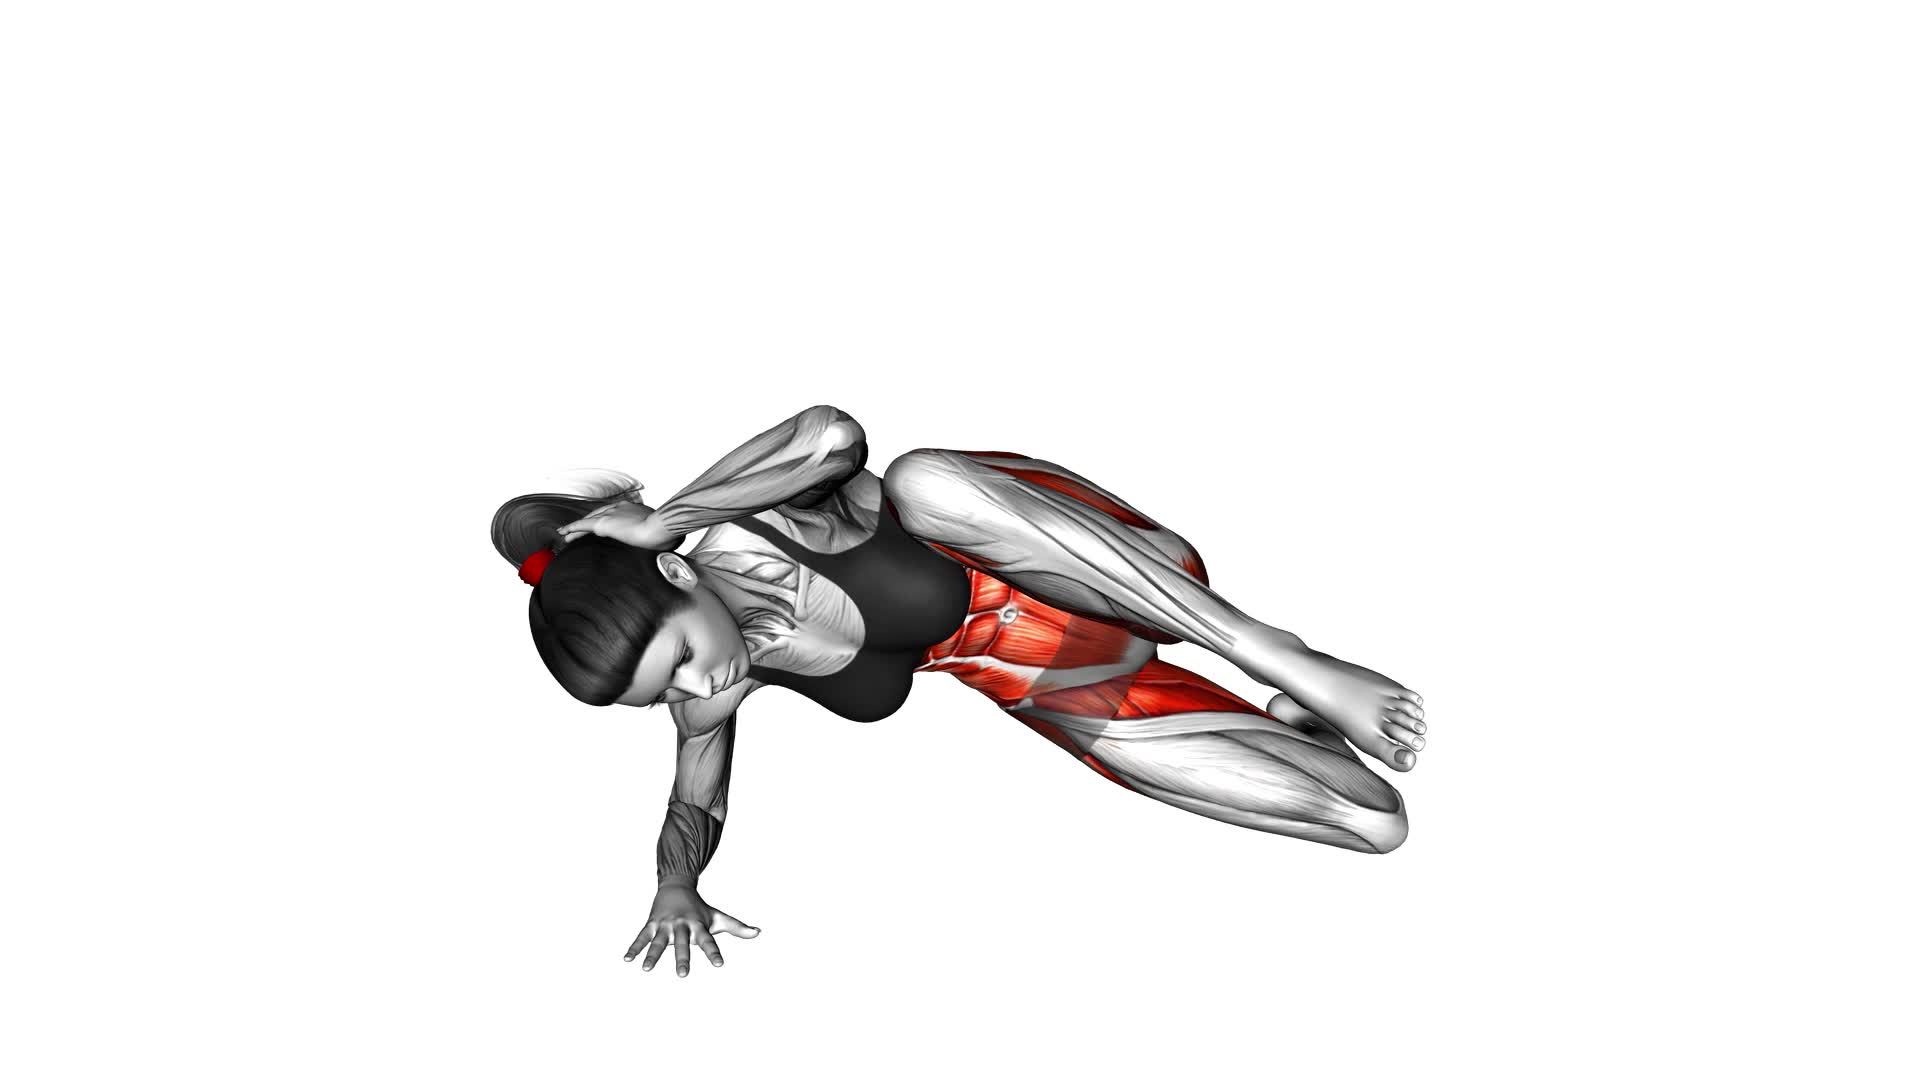 Kneeling Elbow to Knee Side Plank Crunch (female) - Video Exercise Guide & Tips